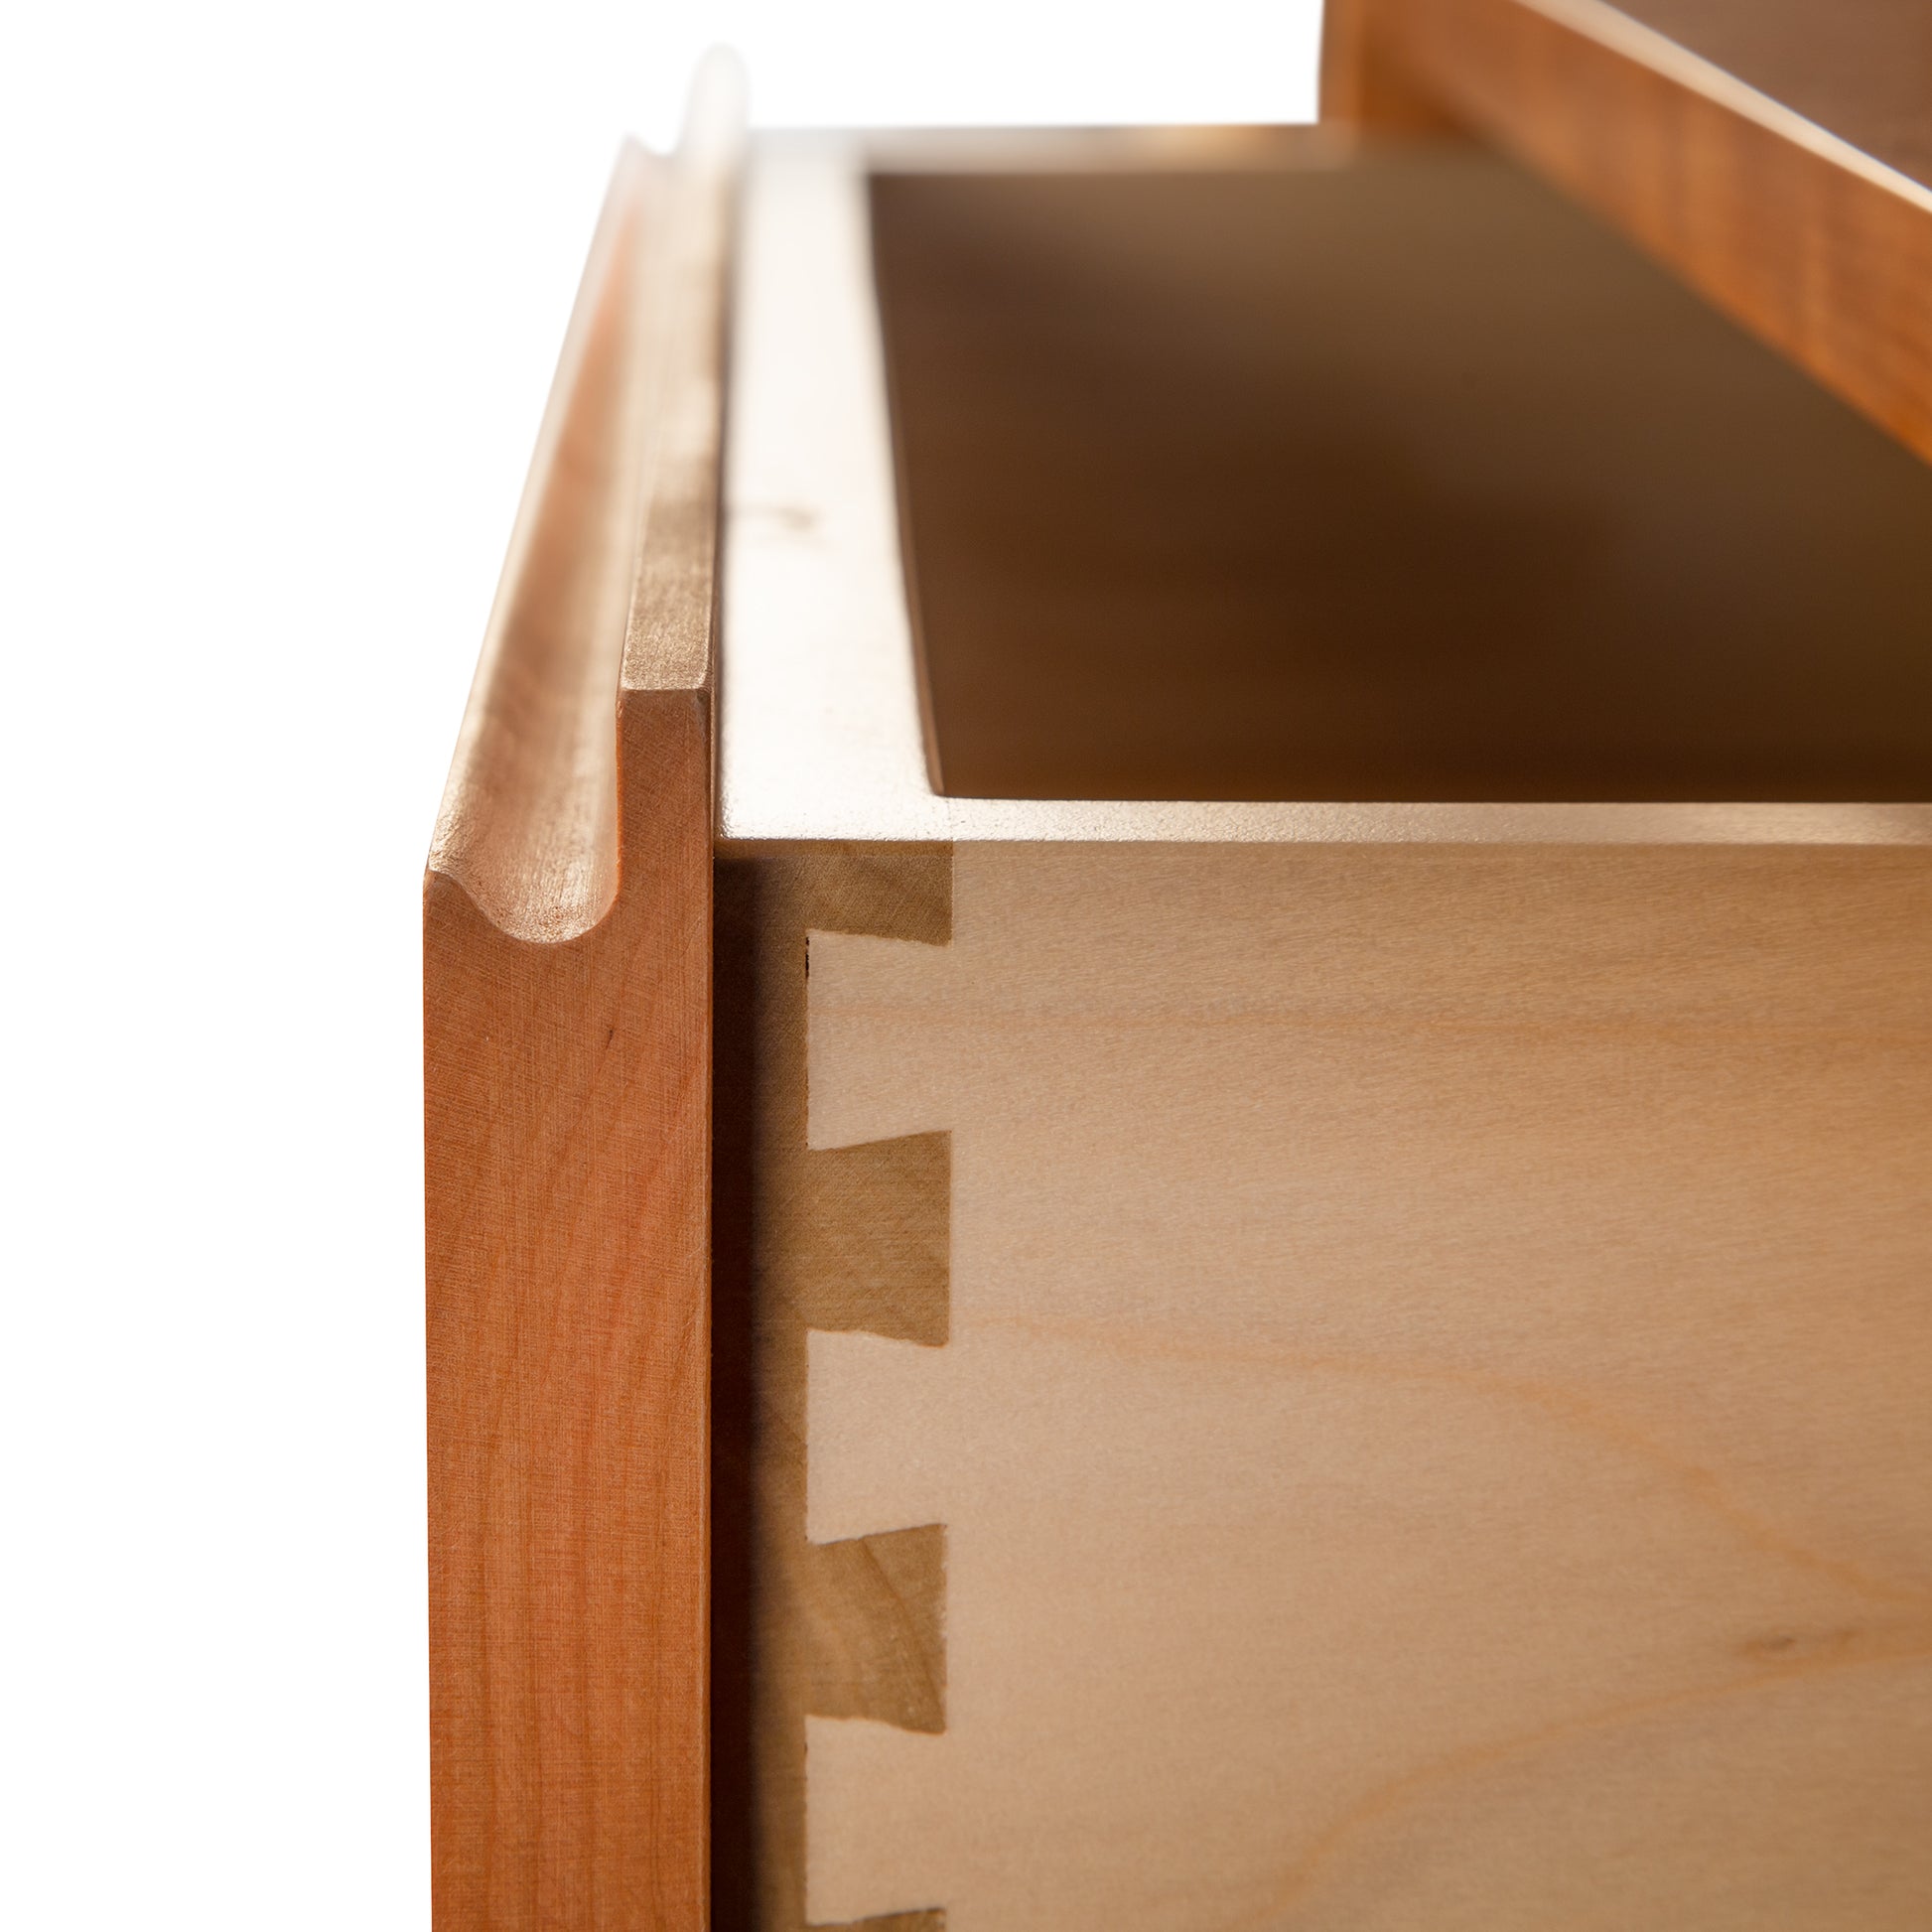 A close up of a wooden drawer.